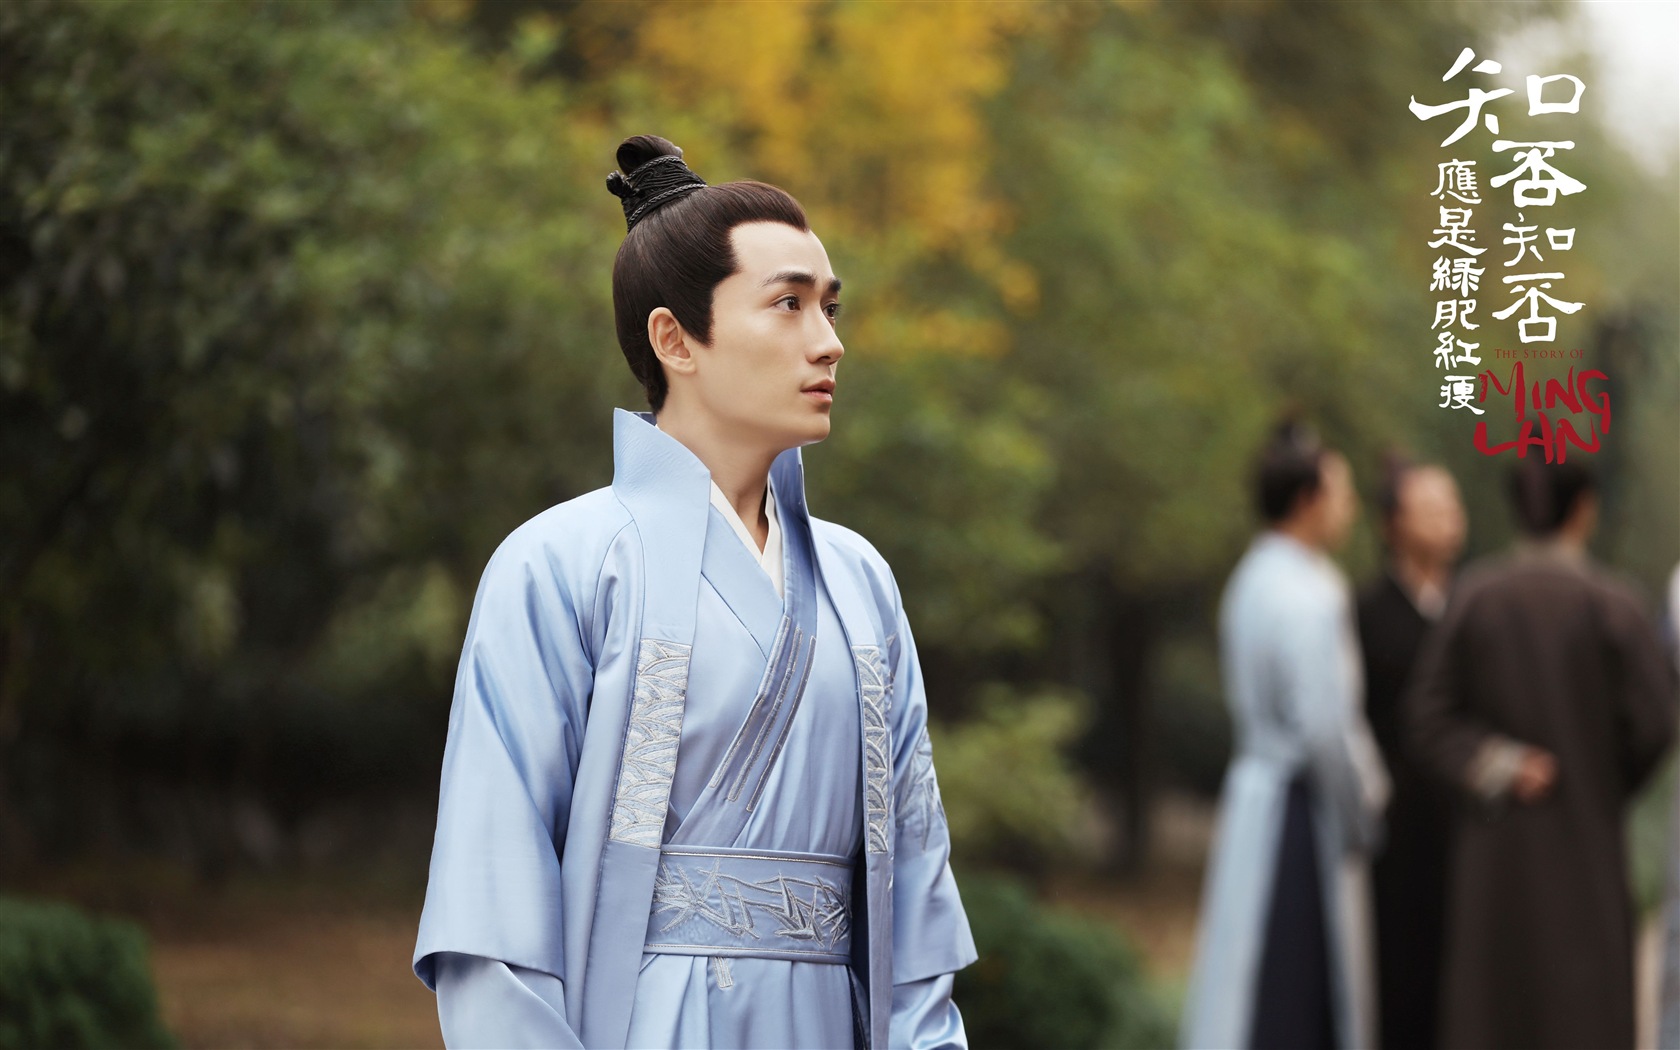 The Story Of MingLan, TV series HD wallpapers #55 - 1680x1050